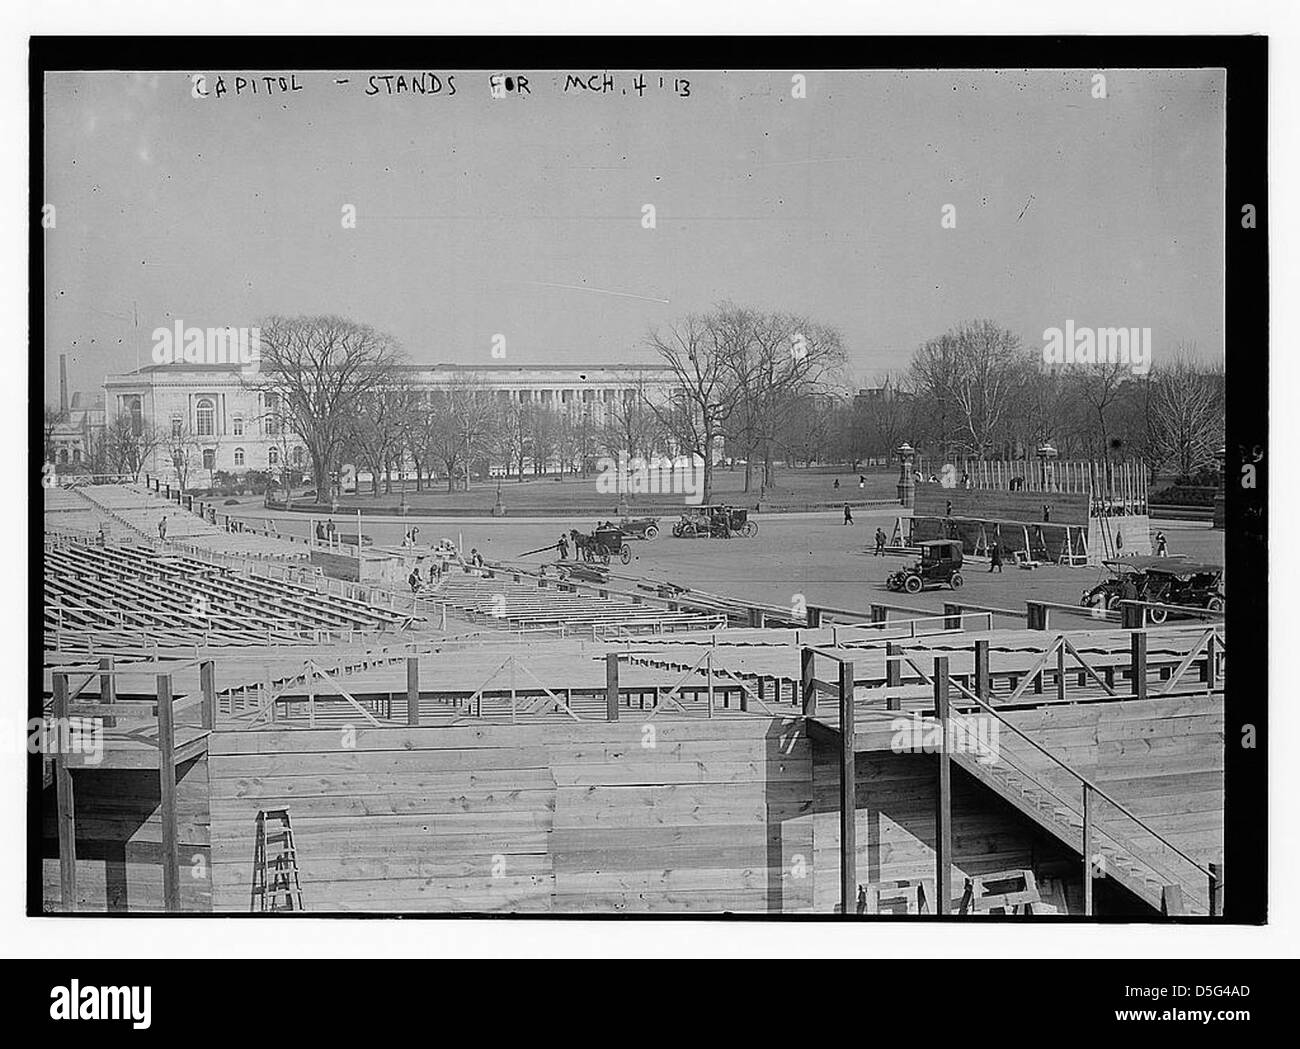 Capitol - stands for Inaug. (LOC) Stock Photo